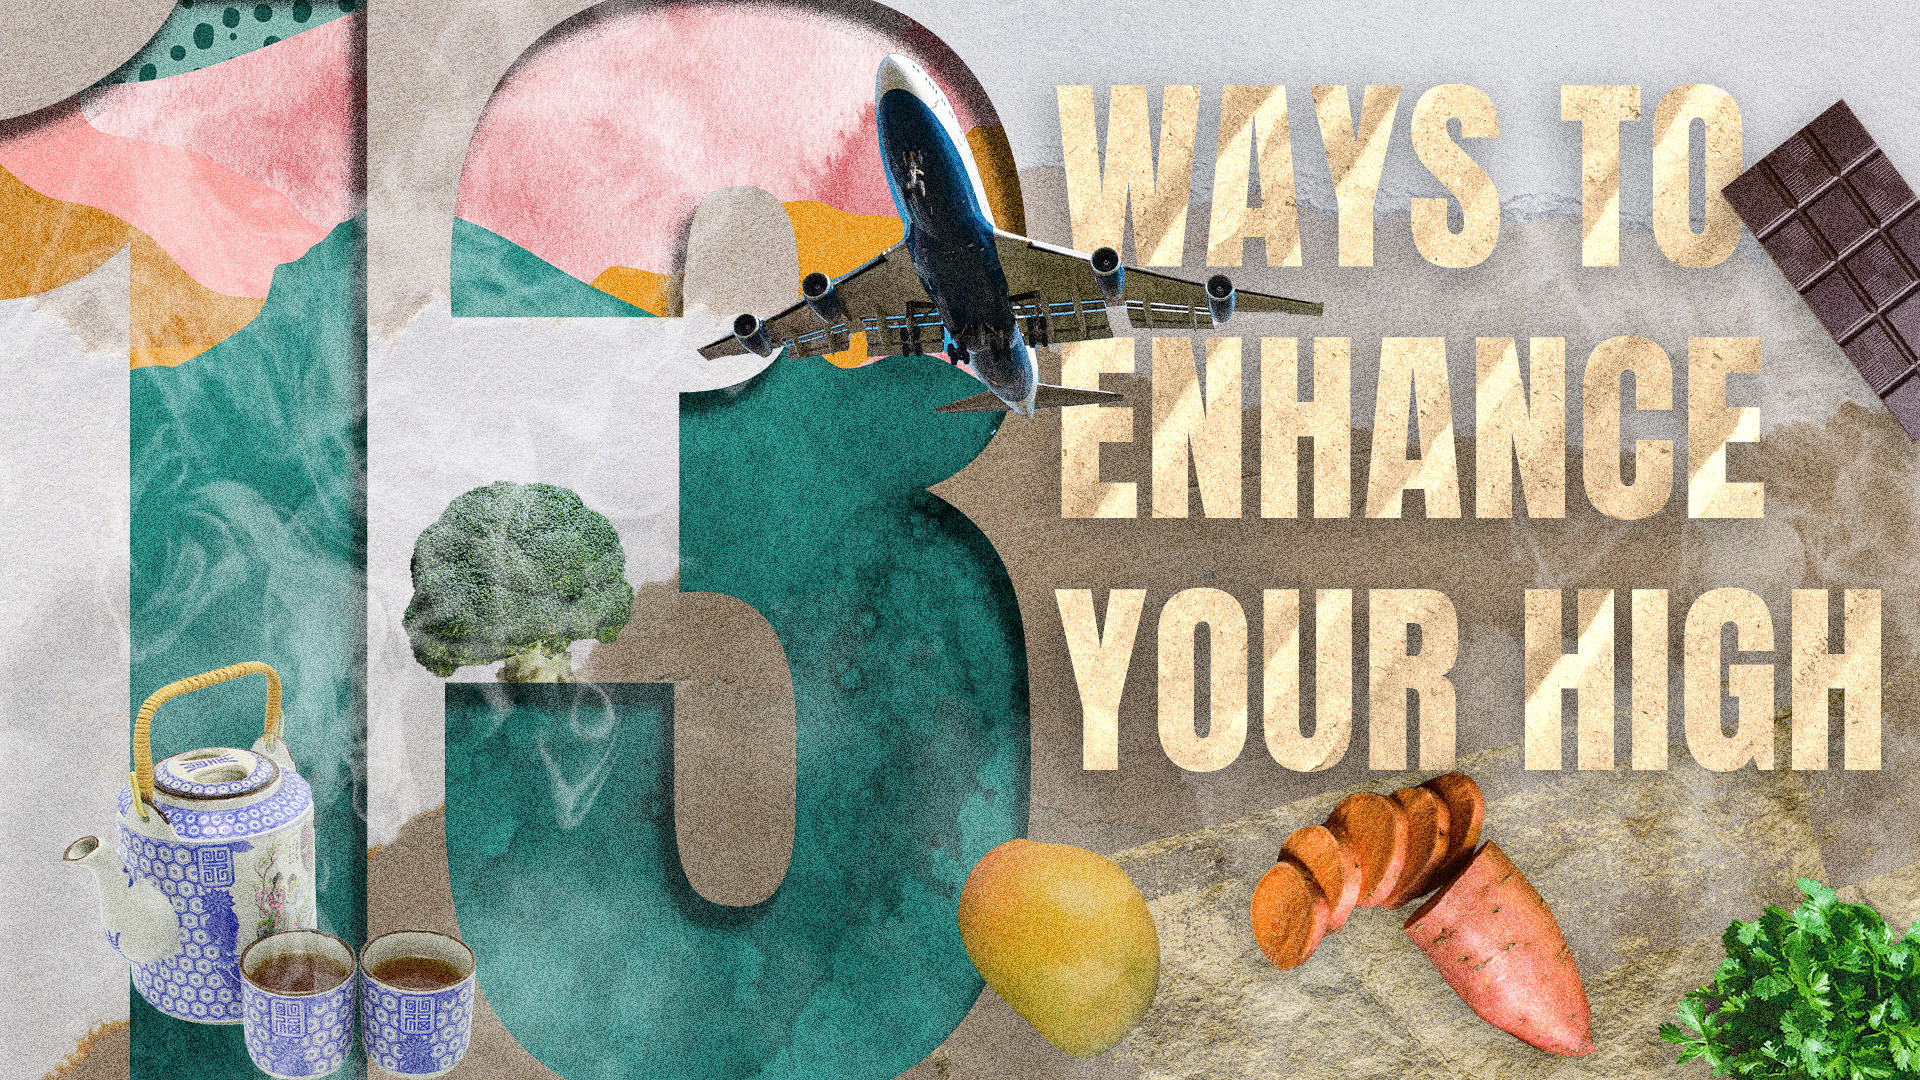 13 Ways to Enhance Your High and Make It Last Longer